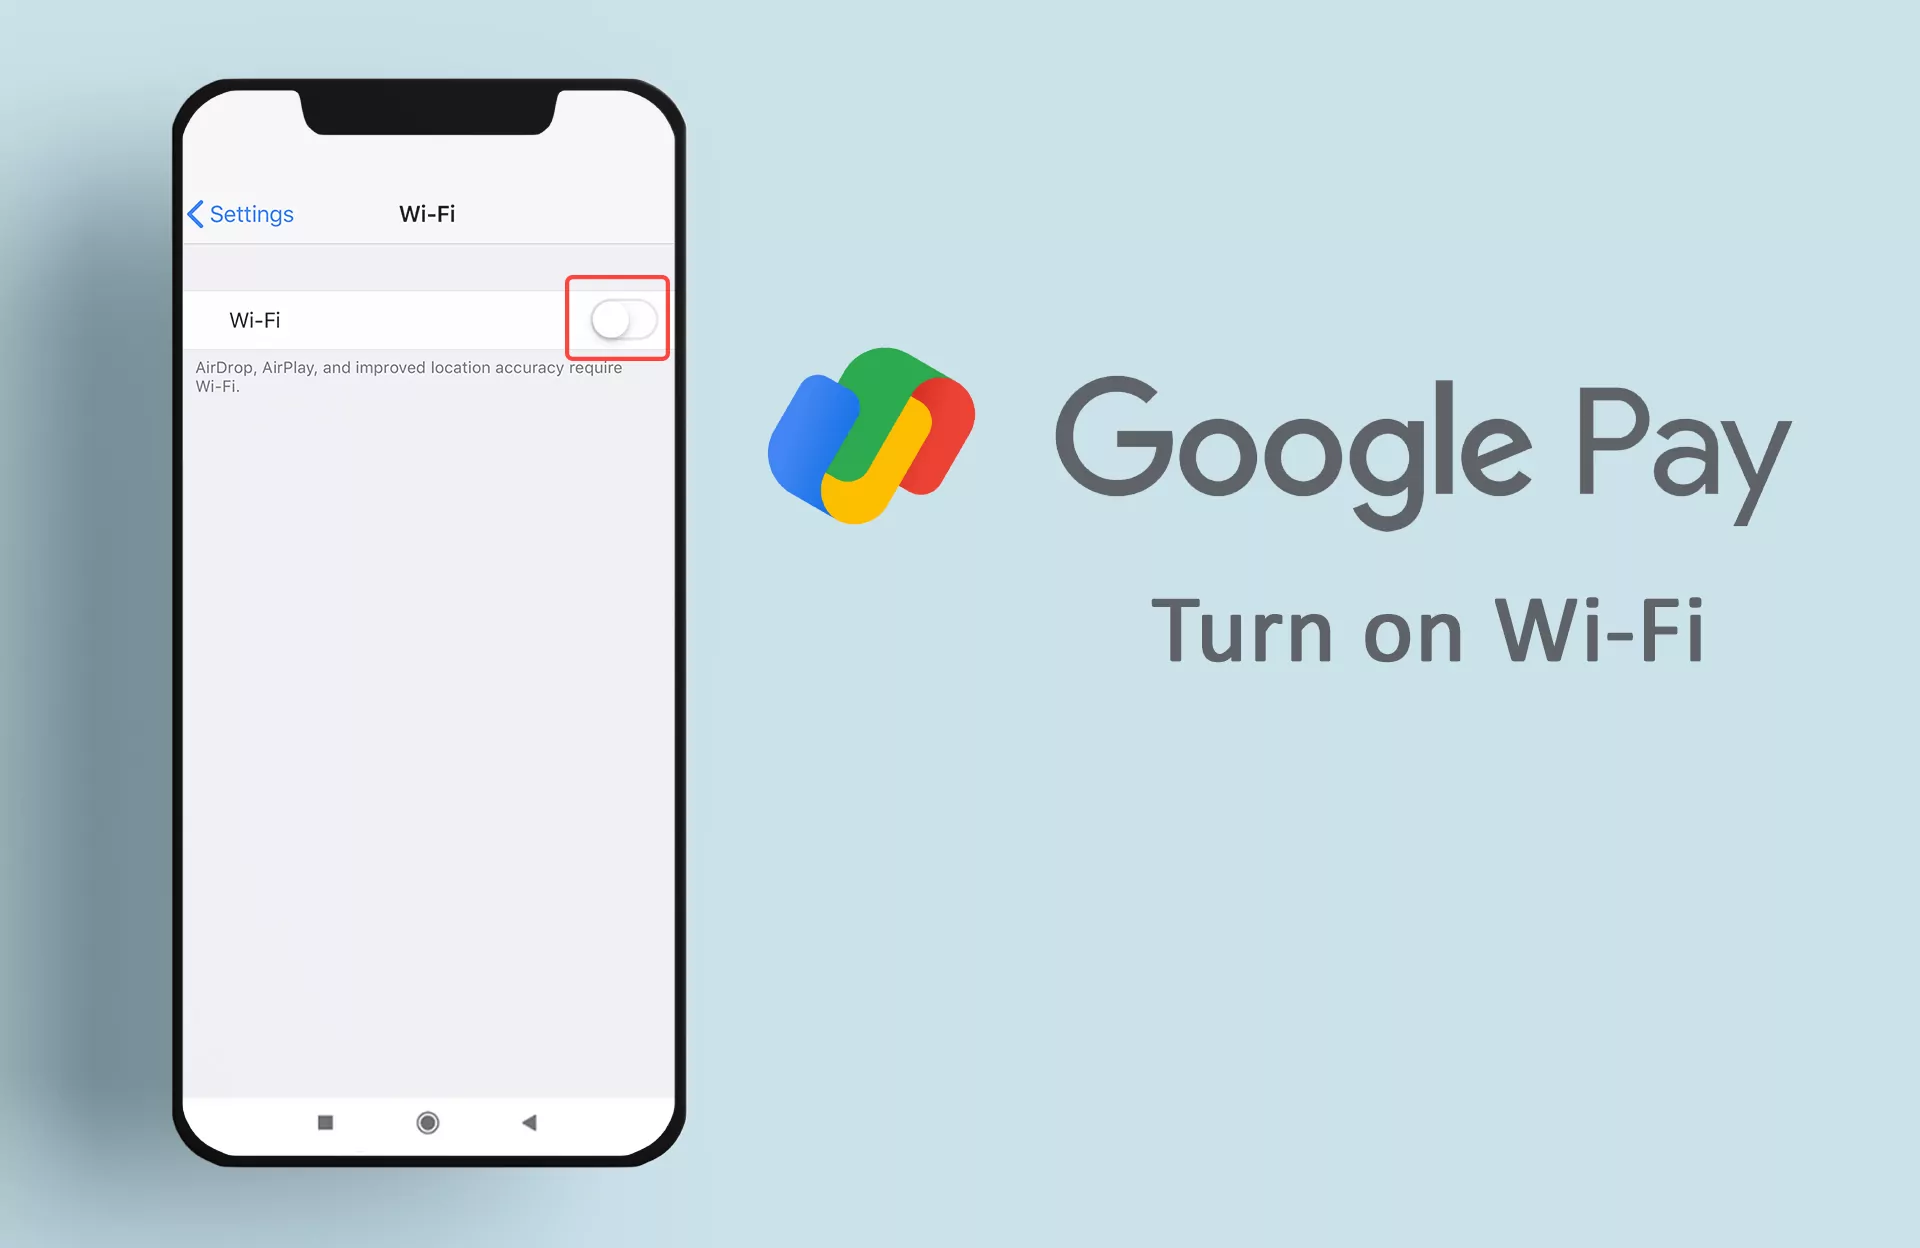 Switch on the Wi-Fi connection on your phone.